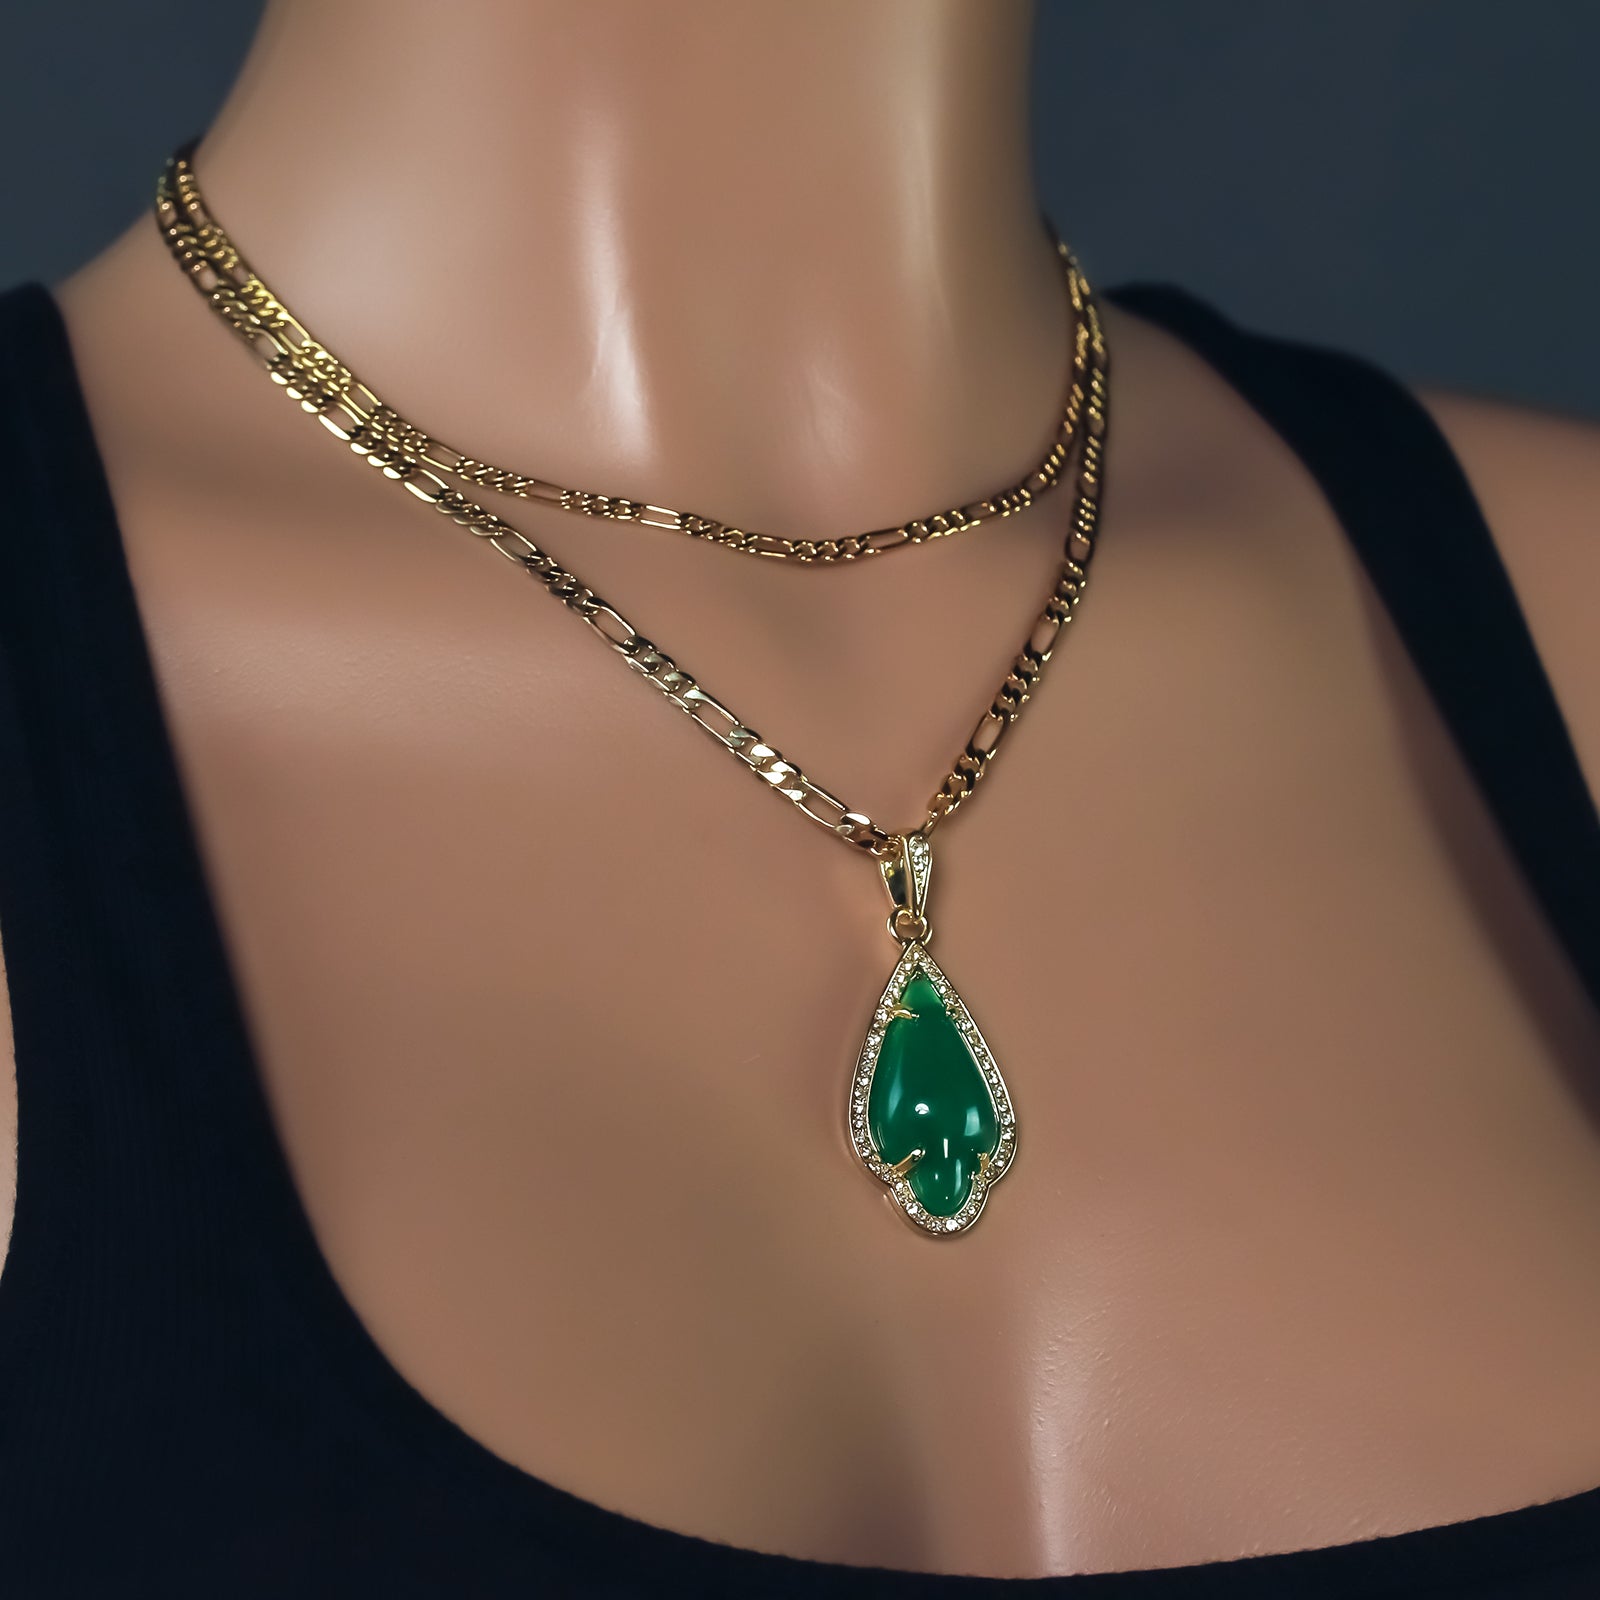 Exquisite Iced Green Jade Arrowl Shape 14k Gold PT Pendant 18"20" Figaro Chains